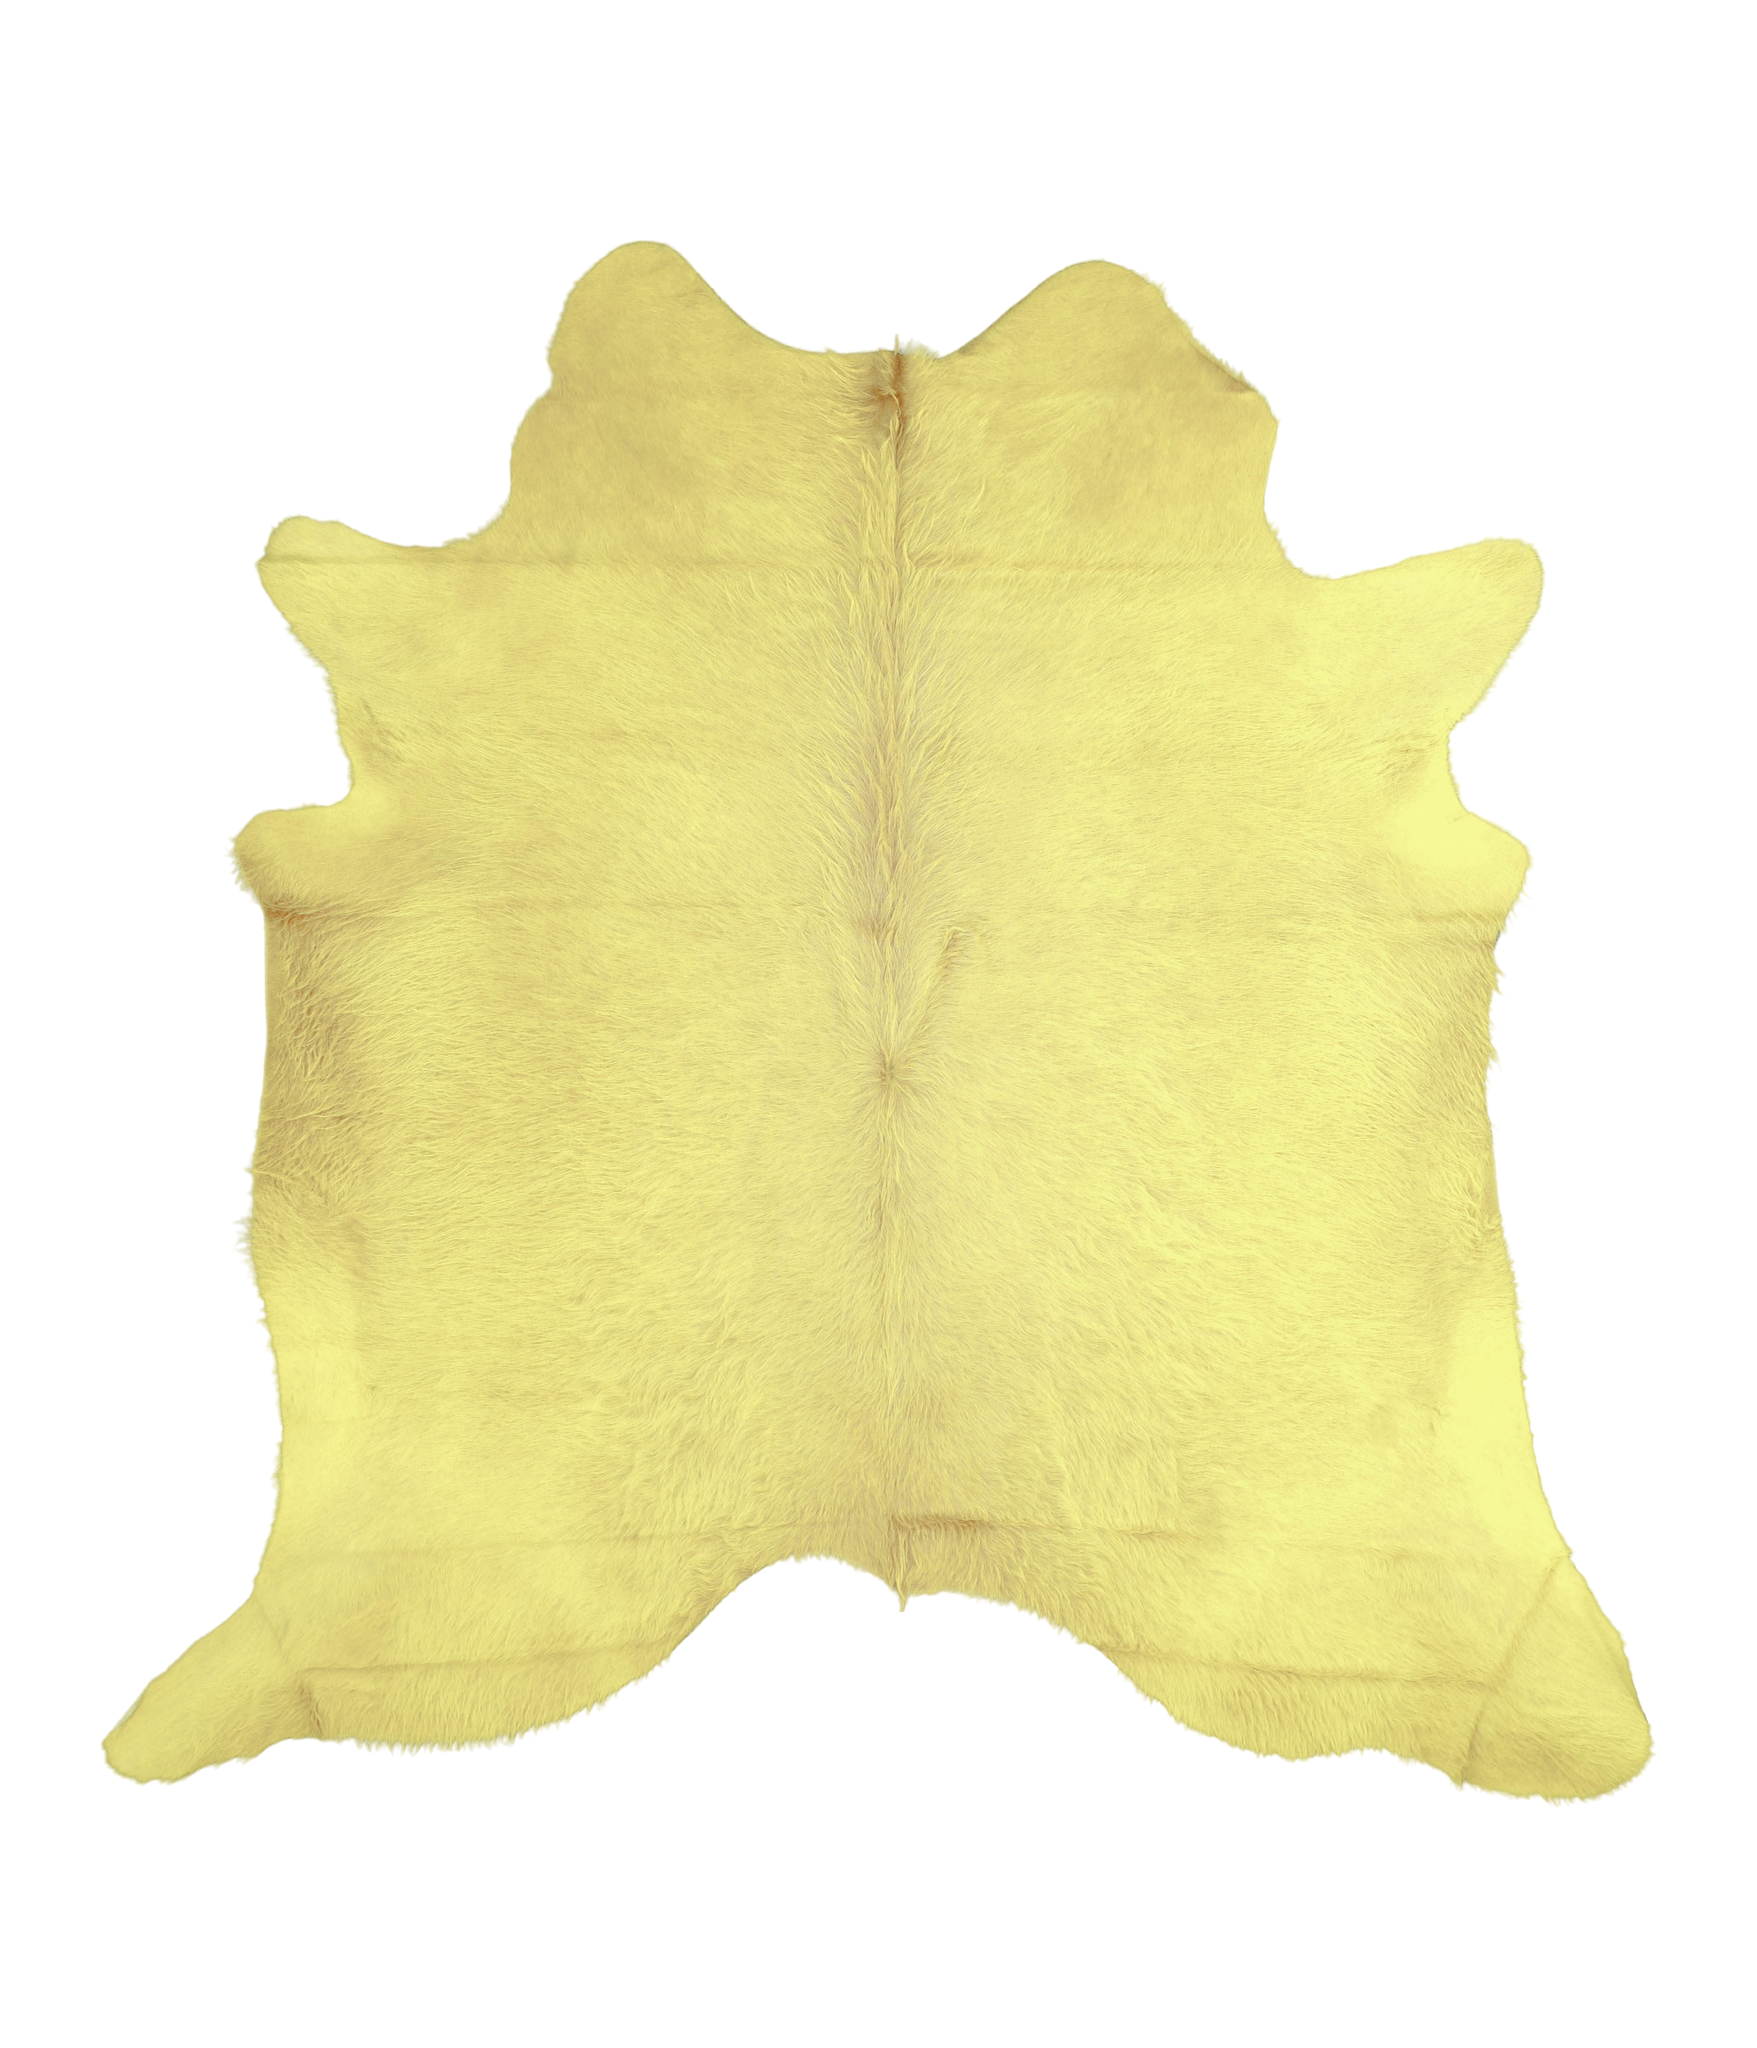 Dyed Yellow Cowhide Rug #A20175